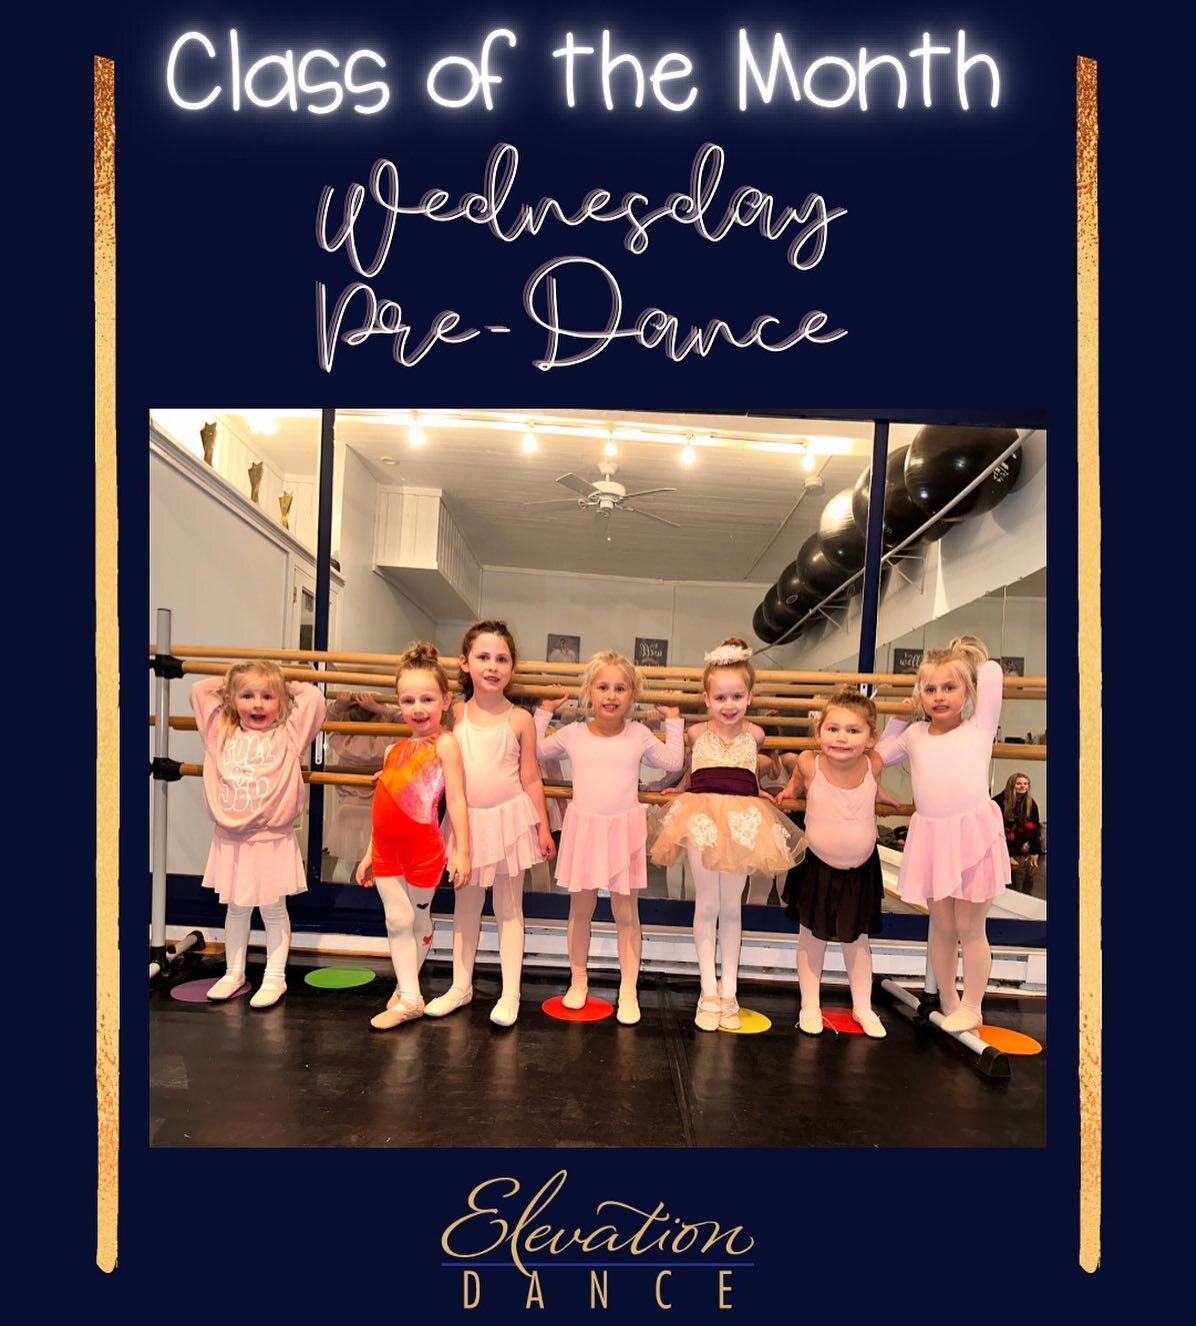 Congratulations to our class of the month! Wednesday pre-dancers work hard and are focused every class. Keep up the great work! #dancersofinstagram #danceclass #minis #ballerina #tap